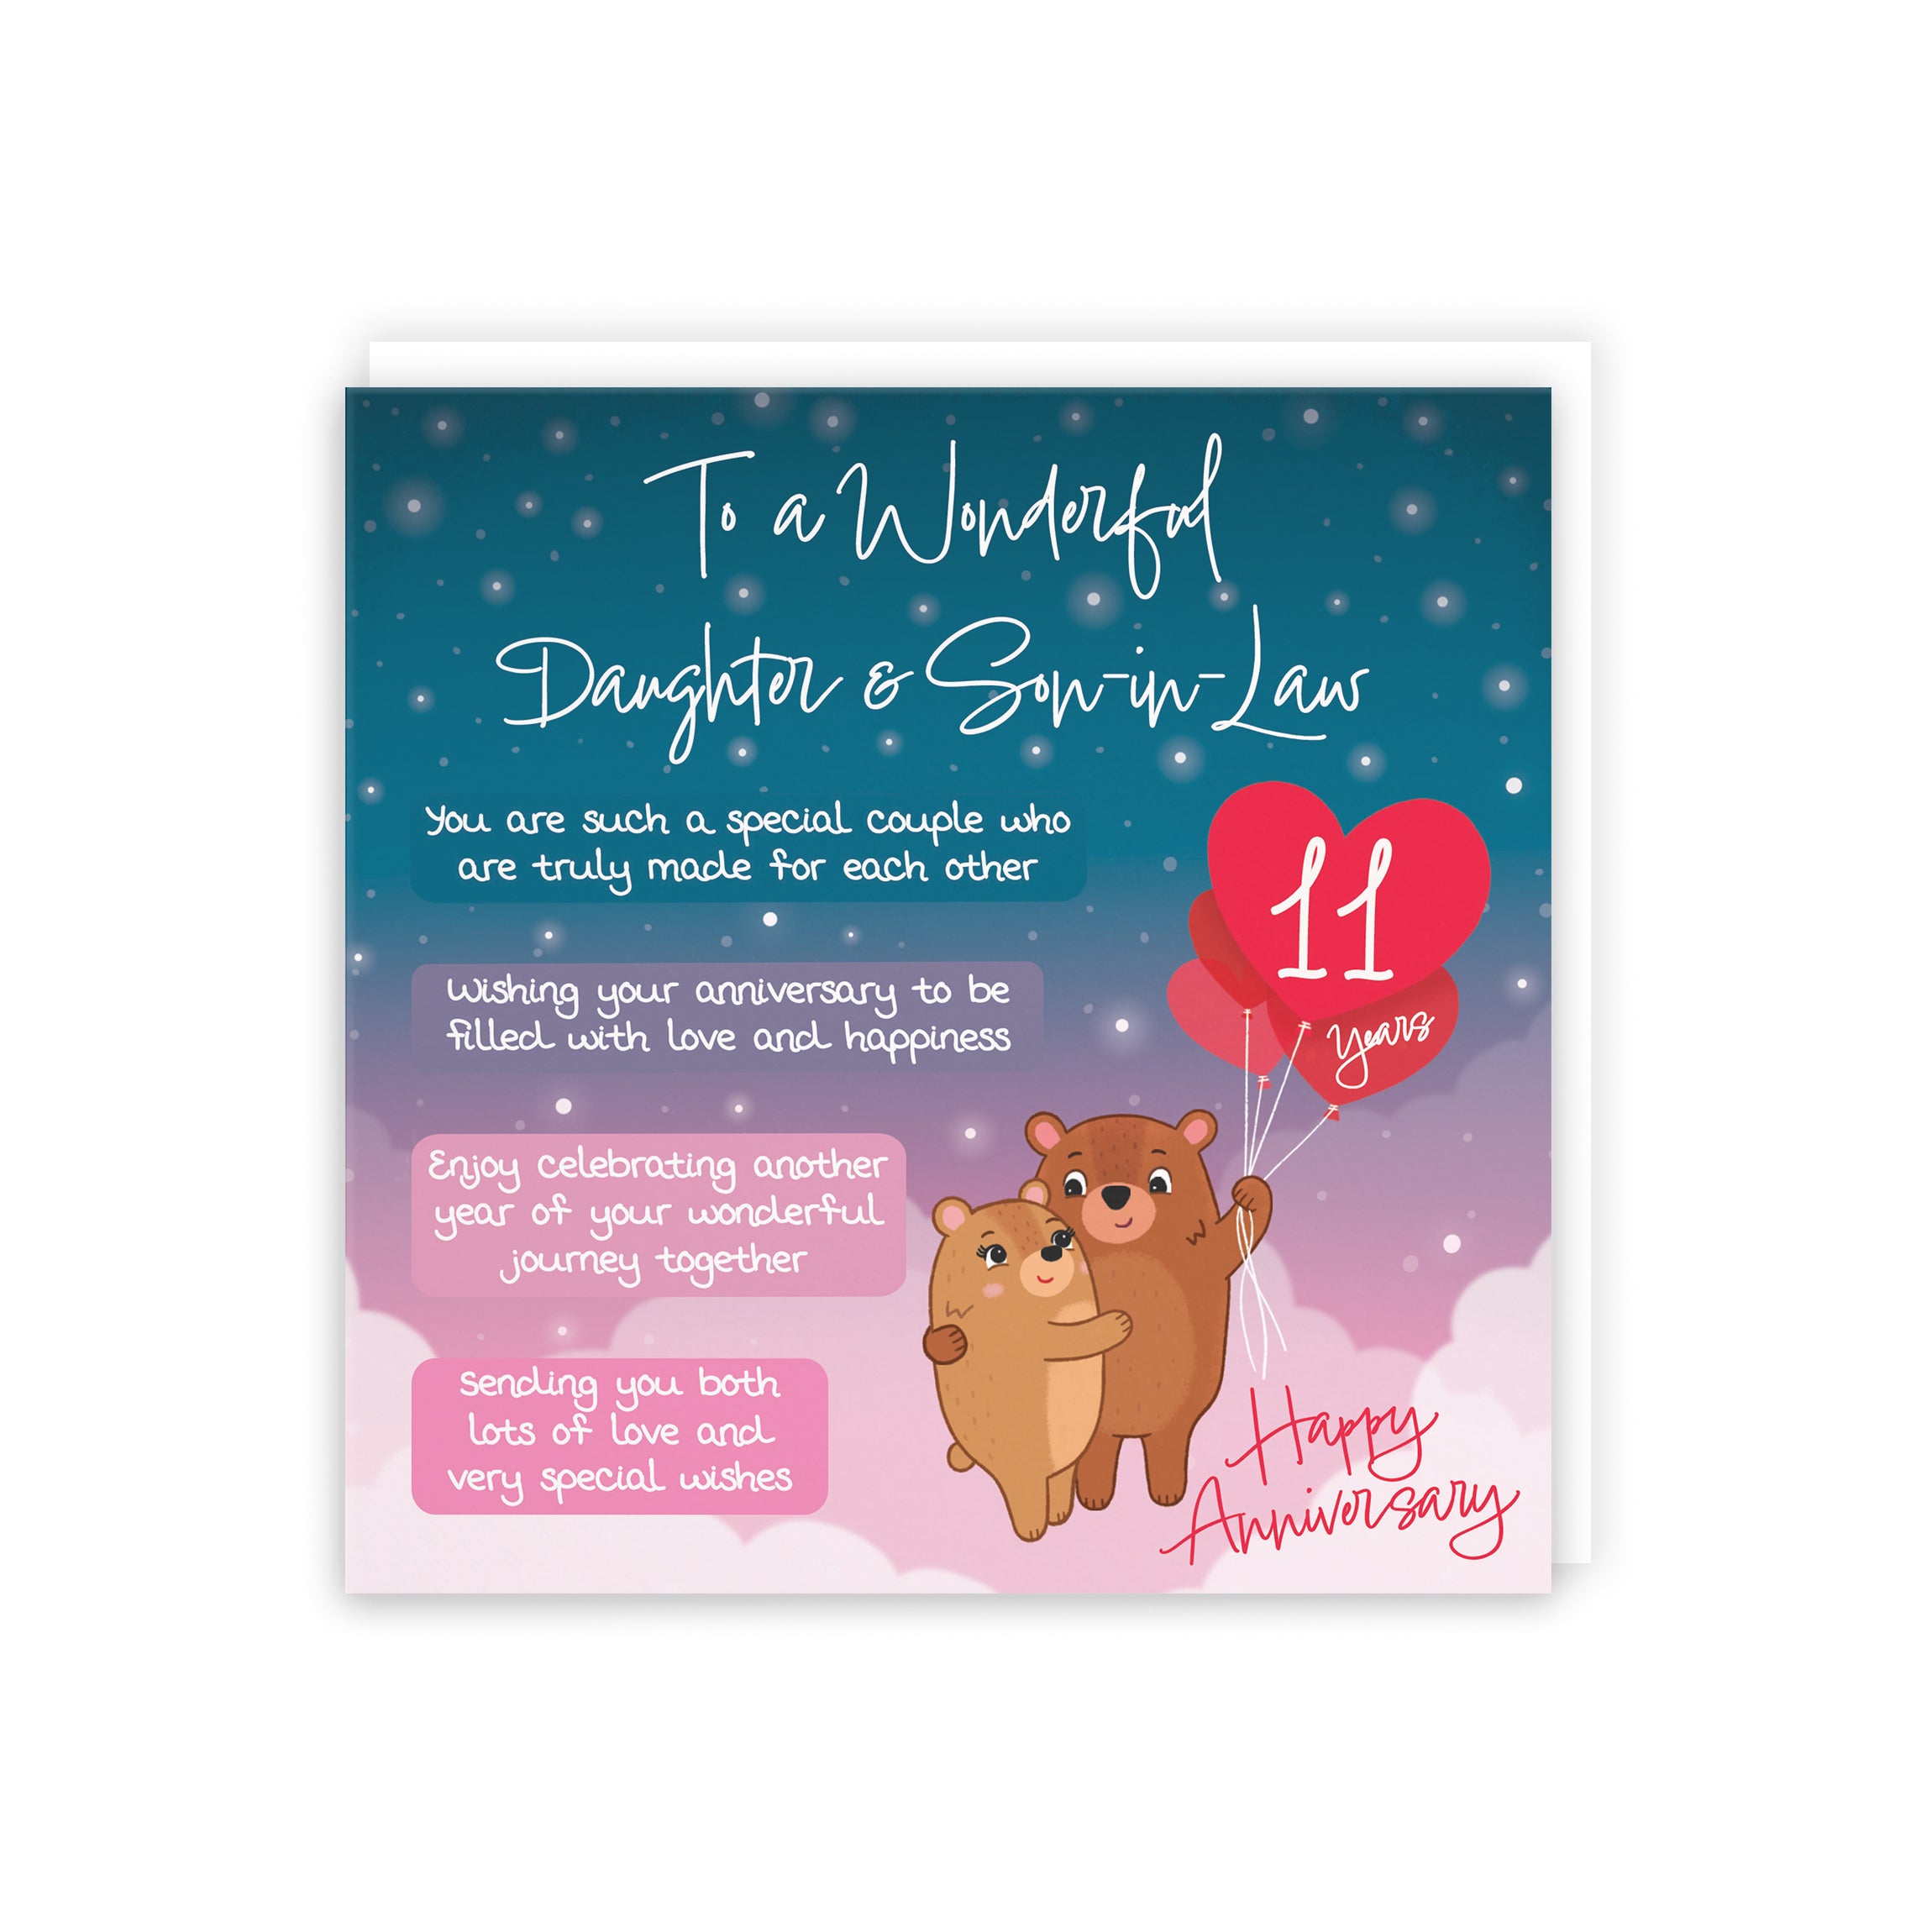 Daughter And Son In Law 11th Anniversary Card Starry Night Cute Bears